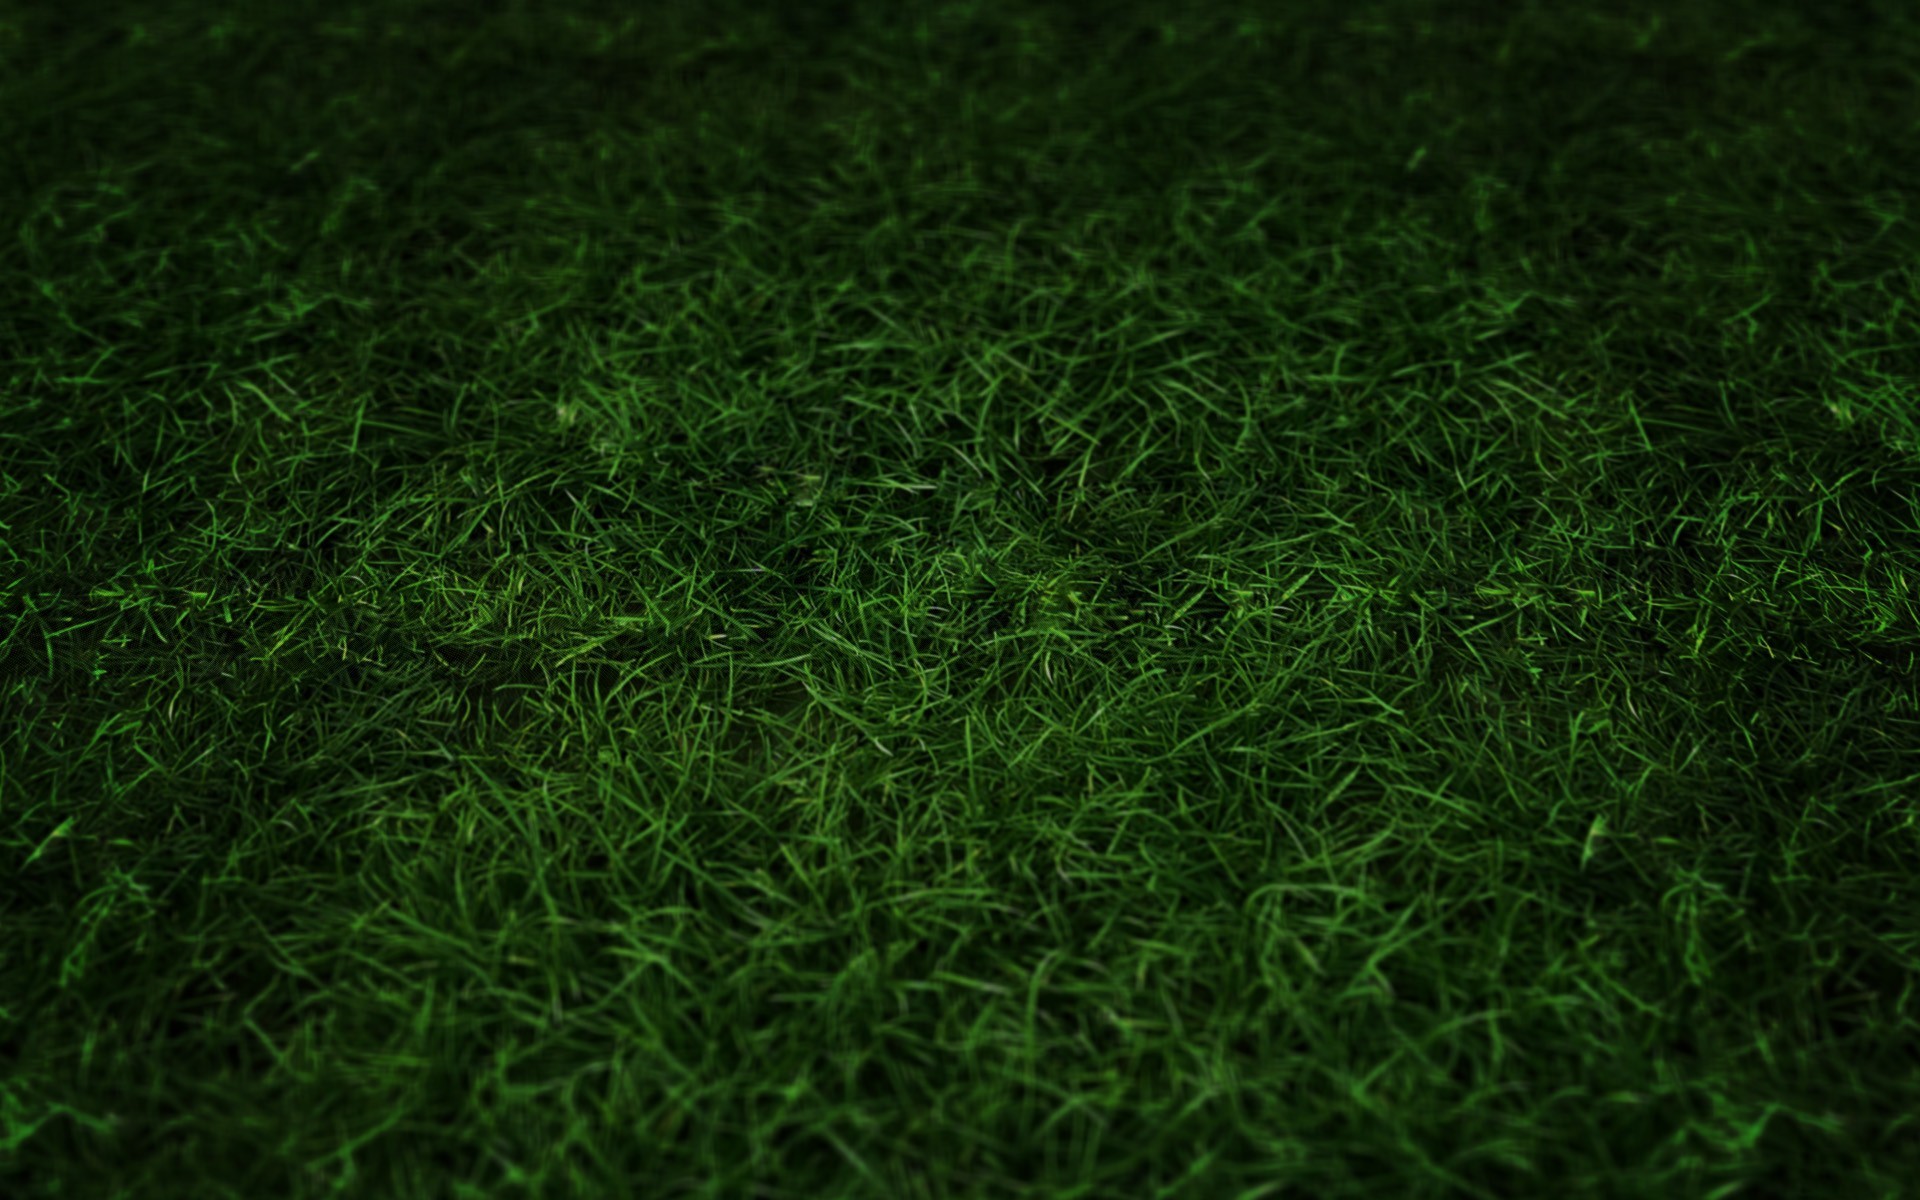 File Name 822784 High Quality Grass Wallpaper Full HD Pictures 1920x1200